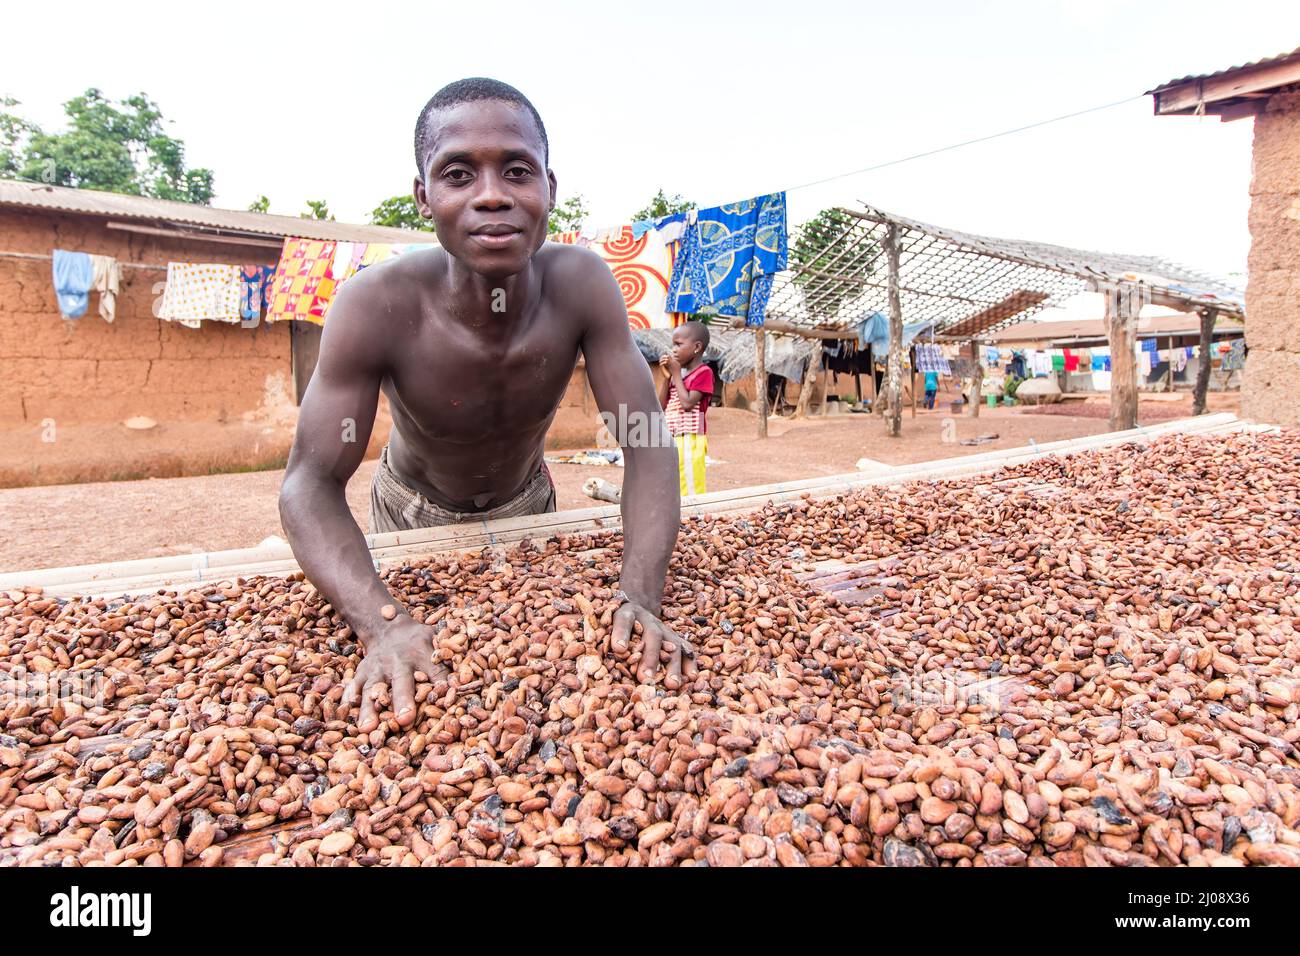 Worker on the cocoa drying bed, Côte d'Ivoire Stock Photo